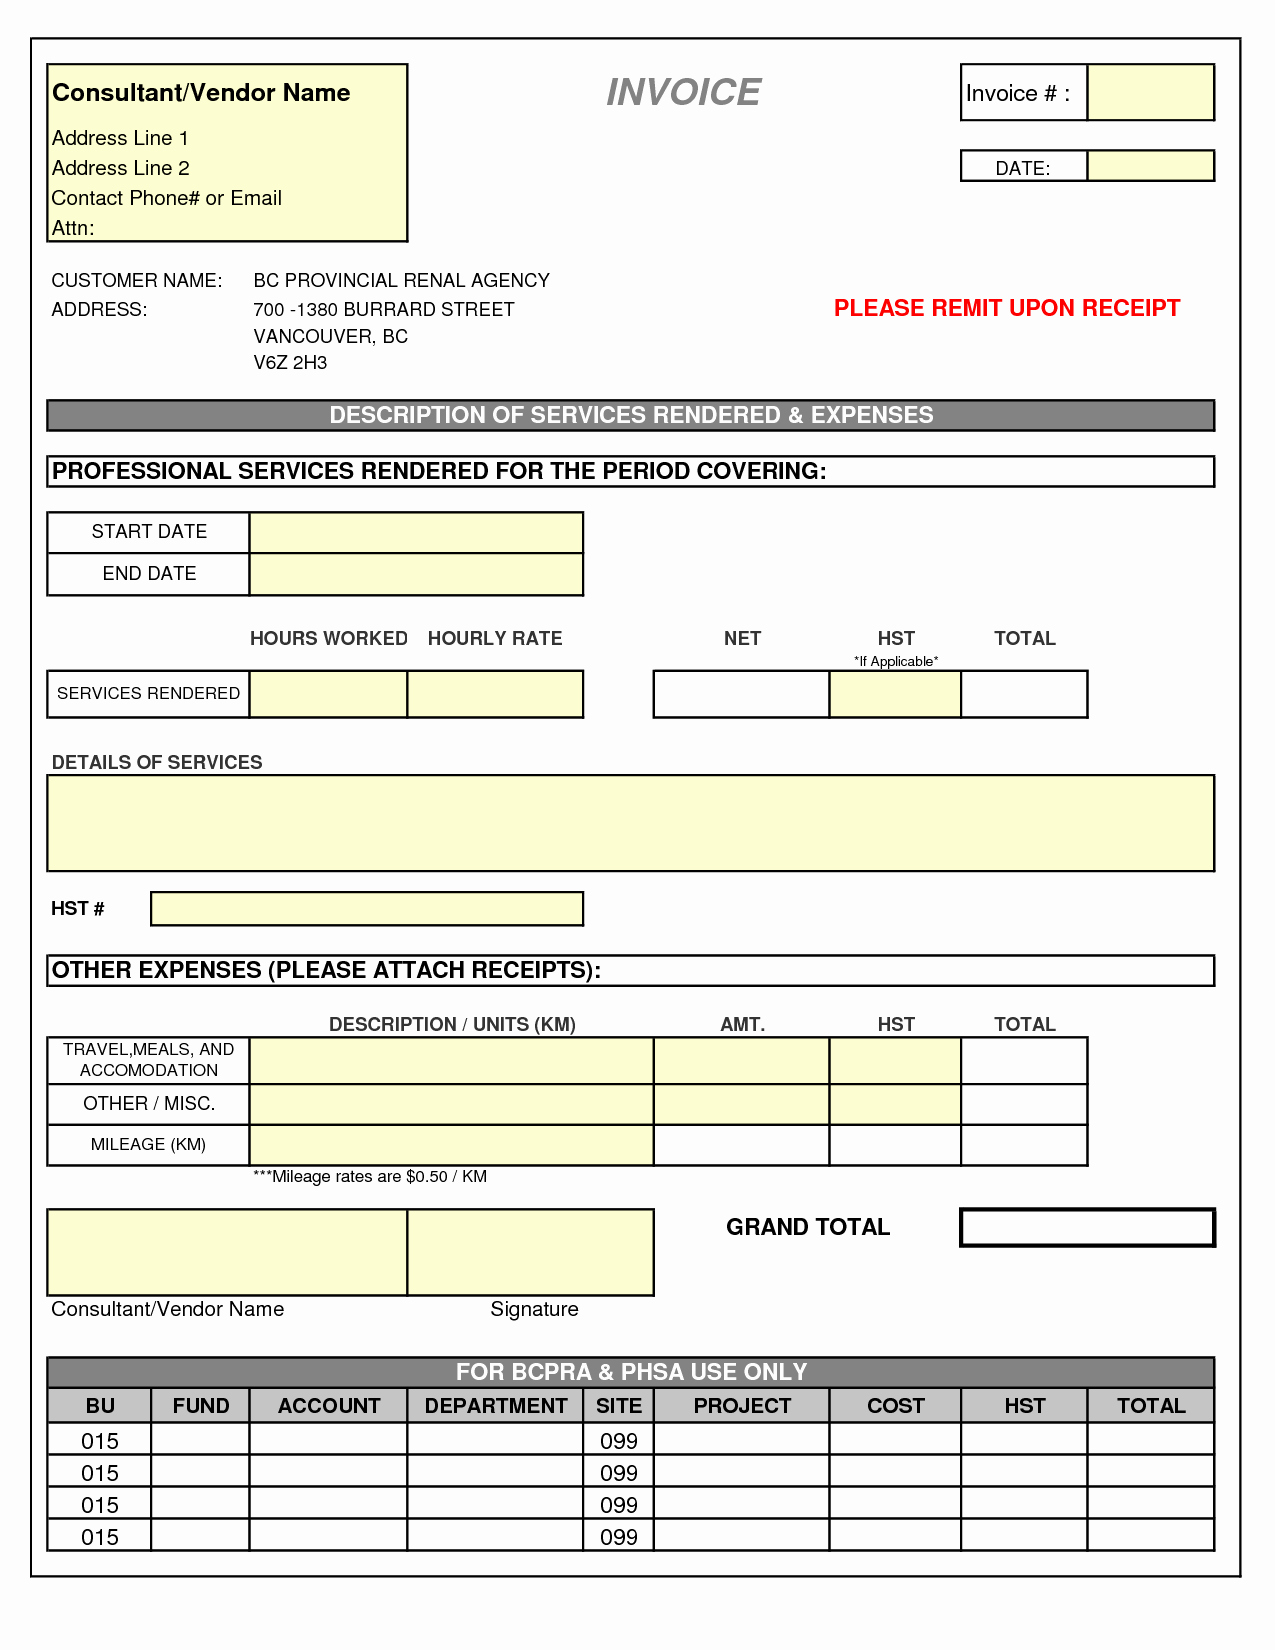 Invoice Template for Consulting Services Lovely Consultant Invoice Template Doc